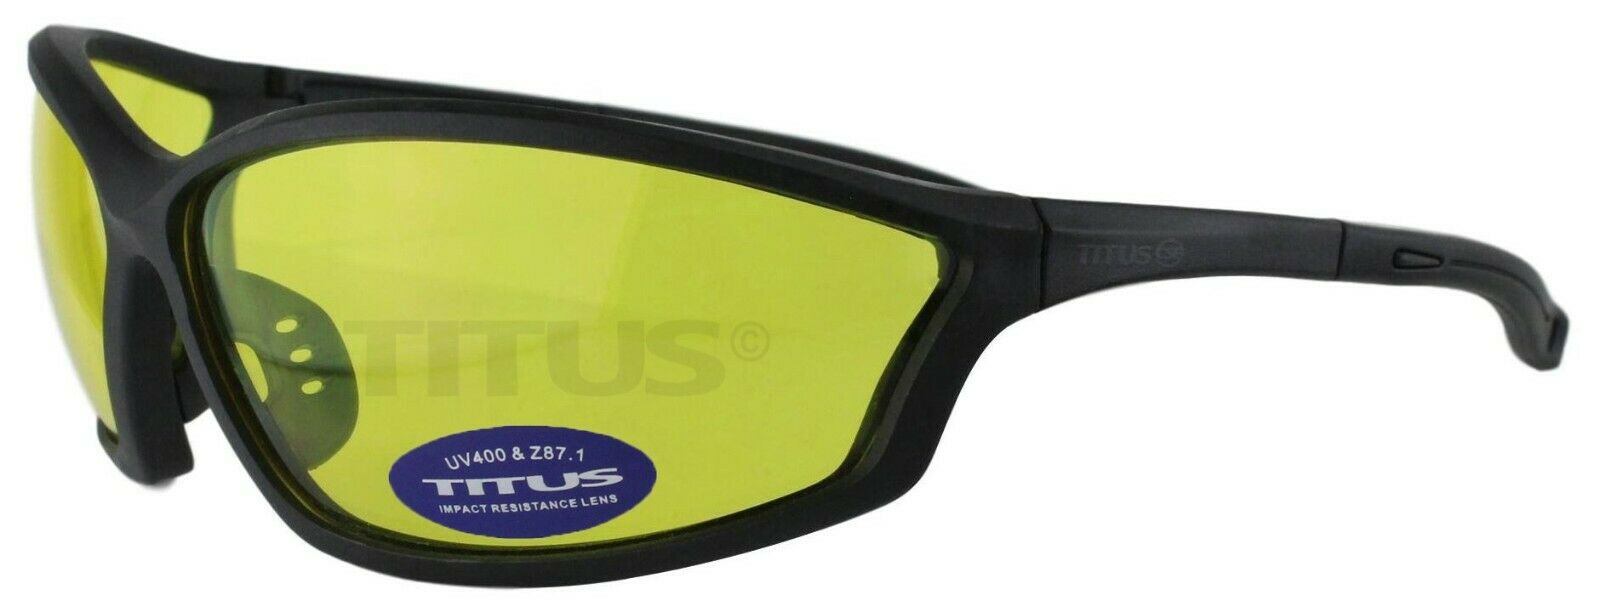 Titus G27 Competition W Rx-able Lens Safety Glasses Shooting Motorcycle Ansi Z87